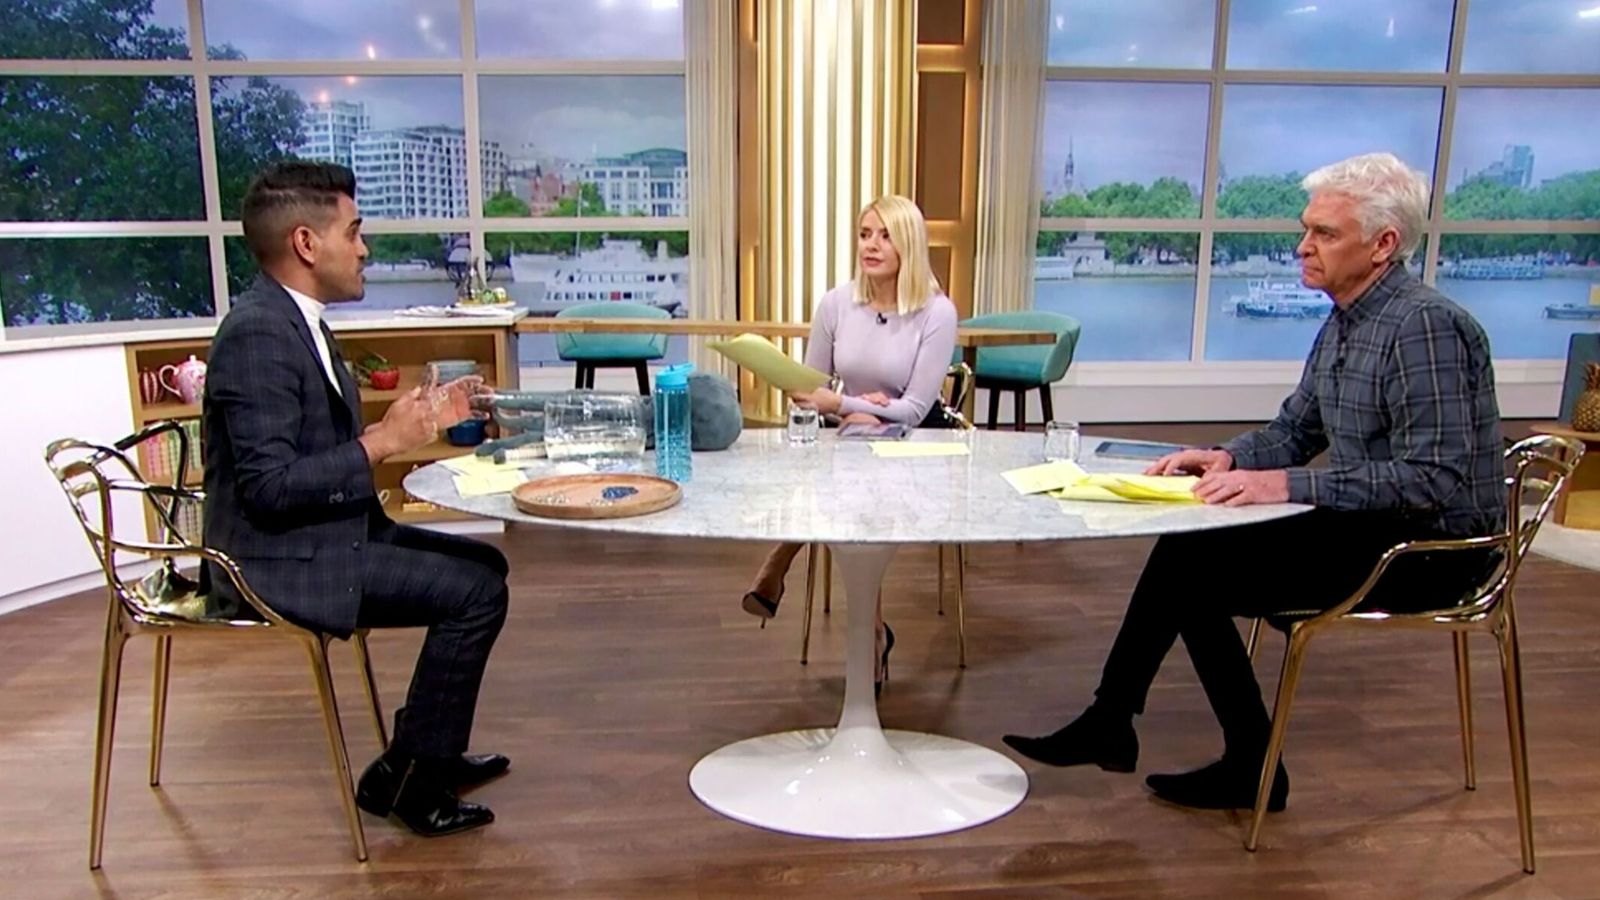 Phillip Schofield: Ex-This Morning star Dr Ranj Singh criticises 'toxic culture' at ITV show and claims he was 'managed out'